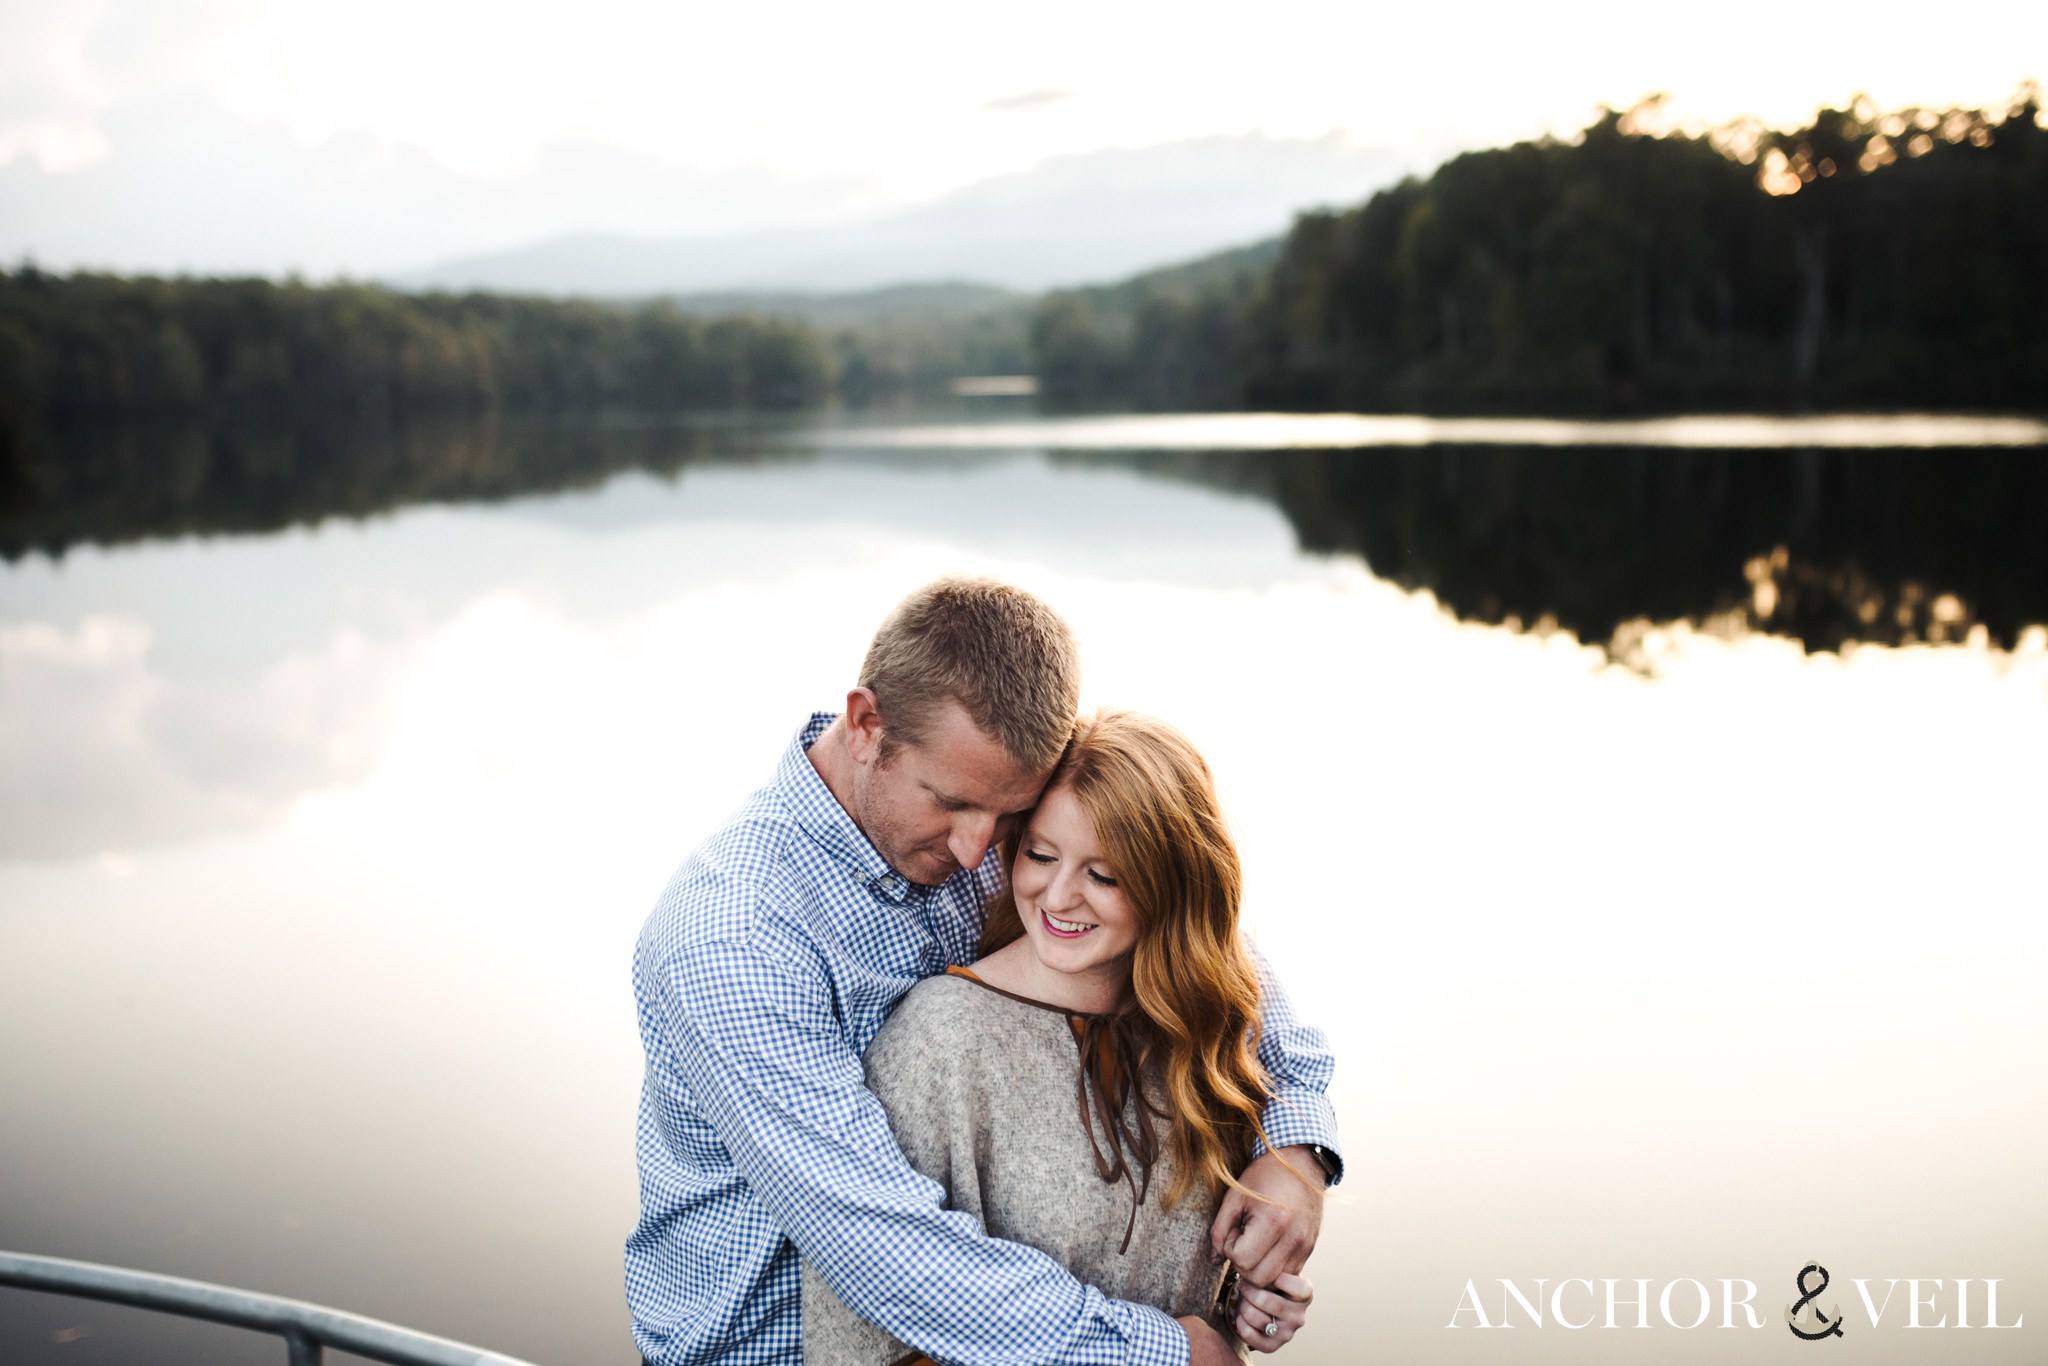 Lake James in Boone during this Engagement Session